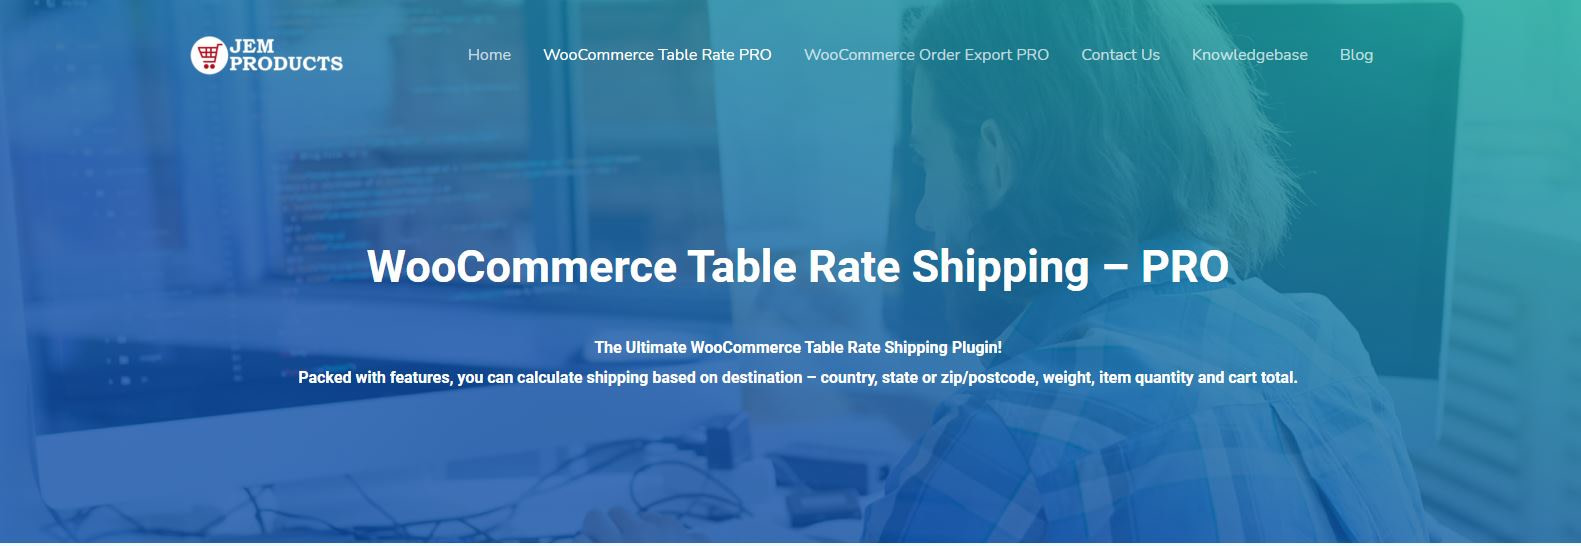 WooCommerce Table Rate Shipping – PRO